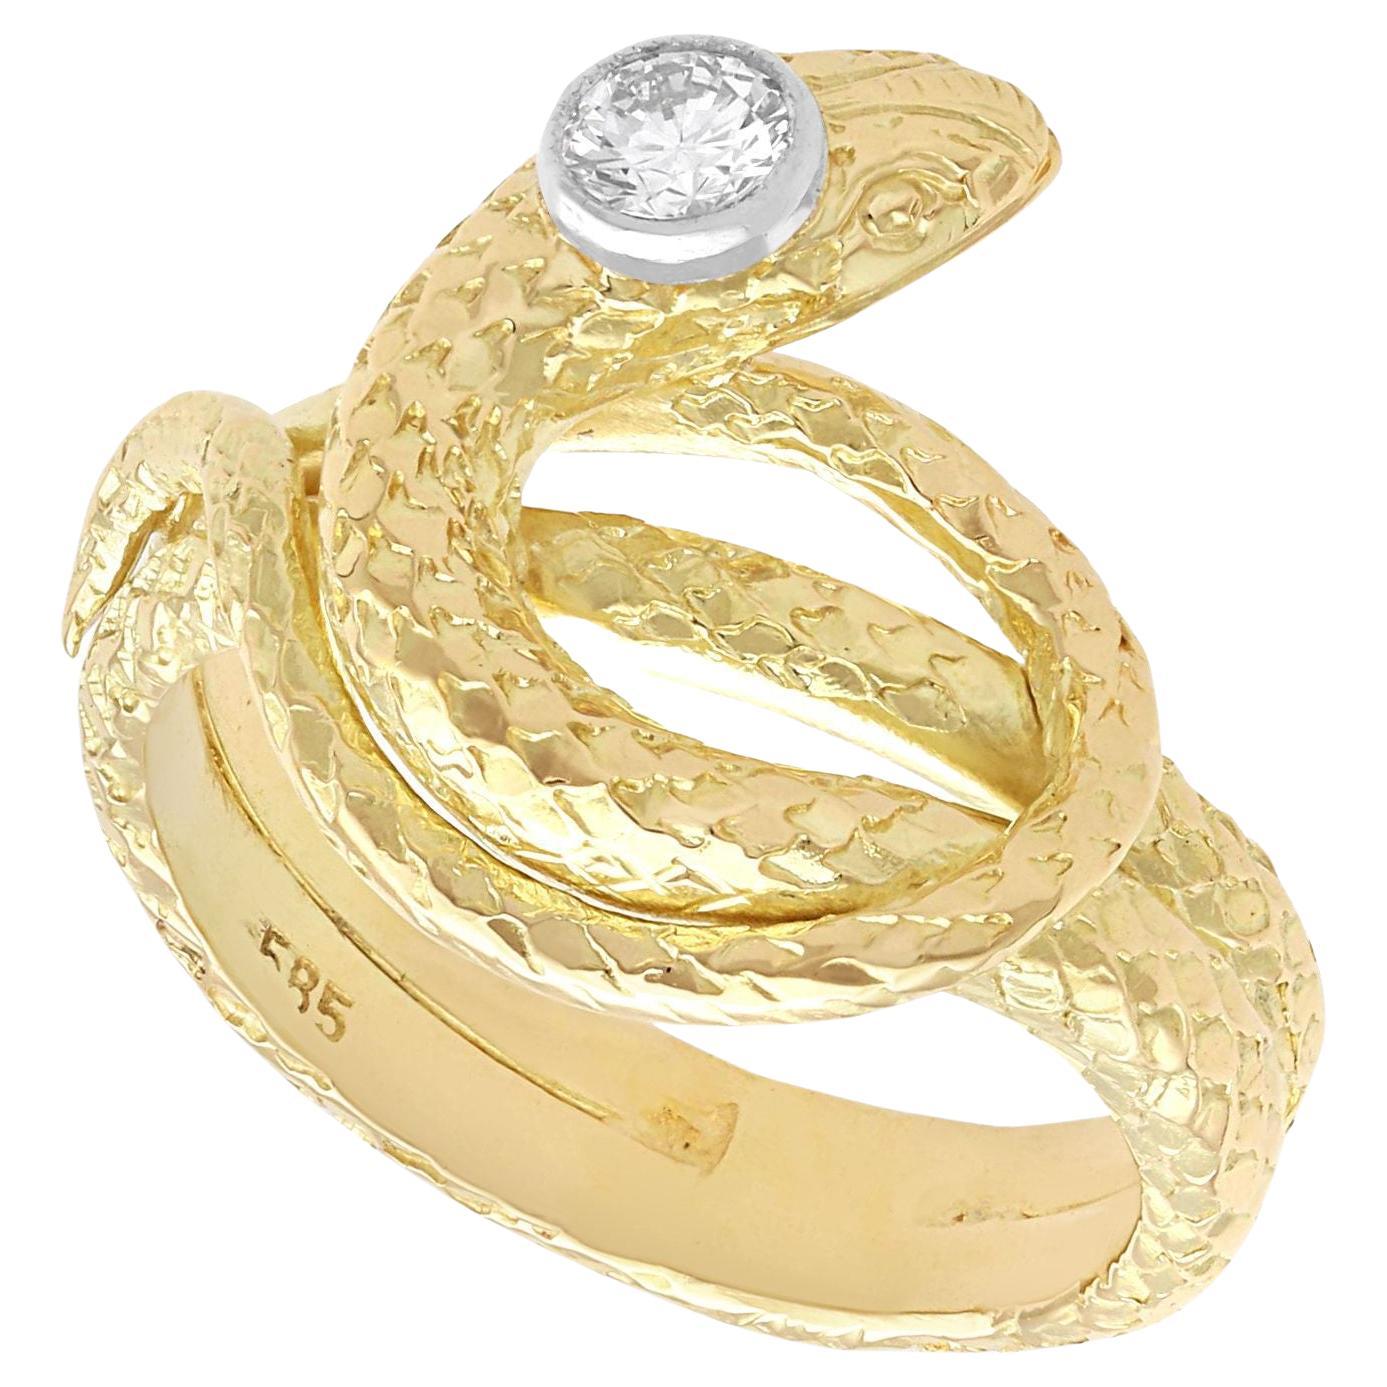 Vintage 0.13ct Diamond and 14ct Yellow Gold Snake Ring